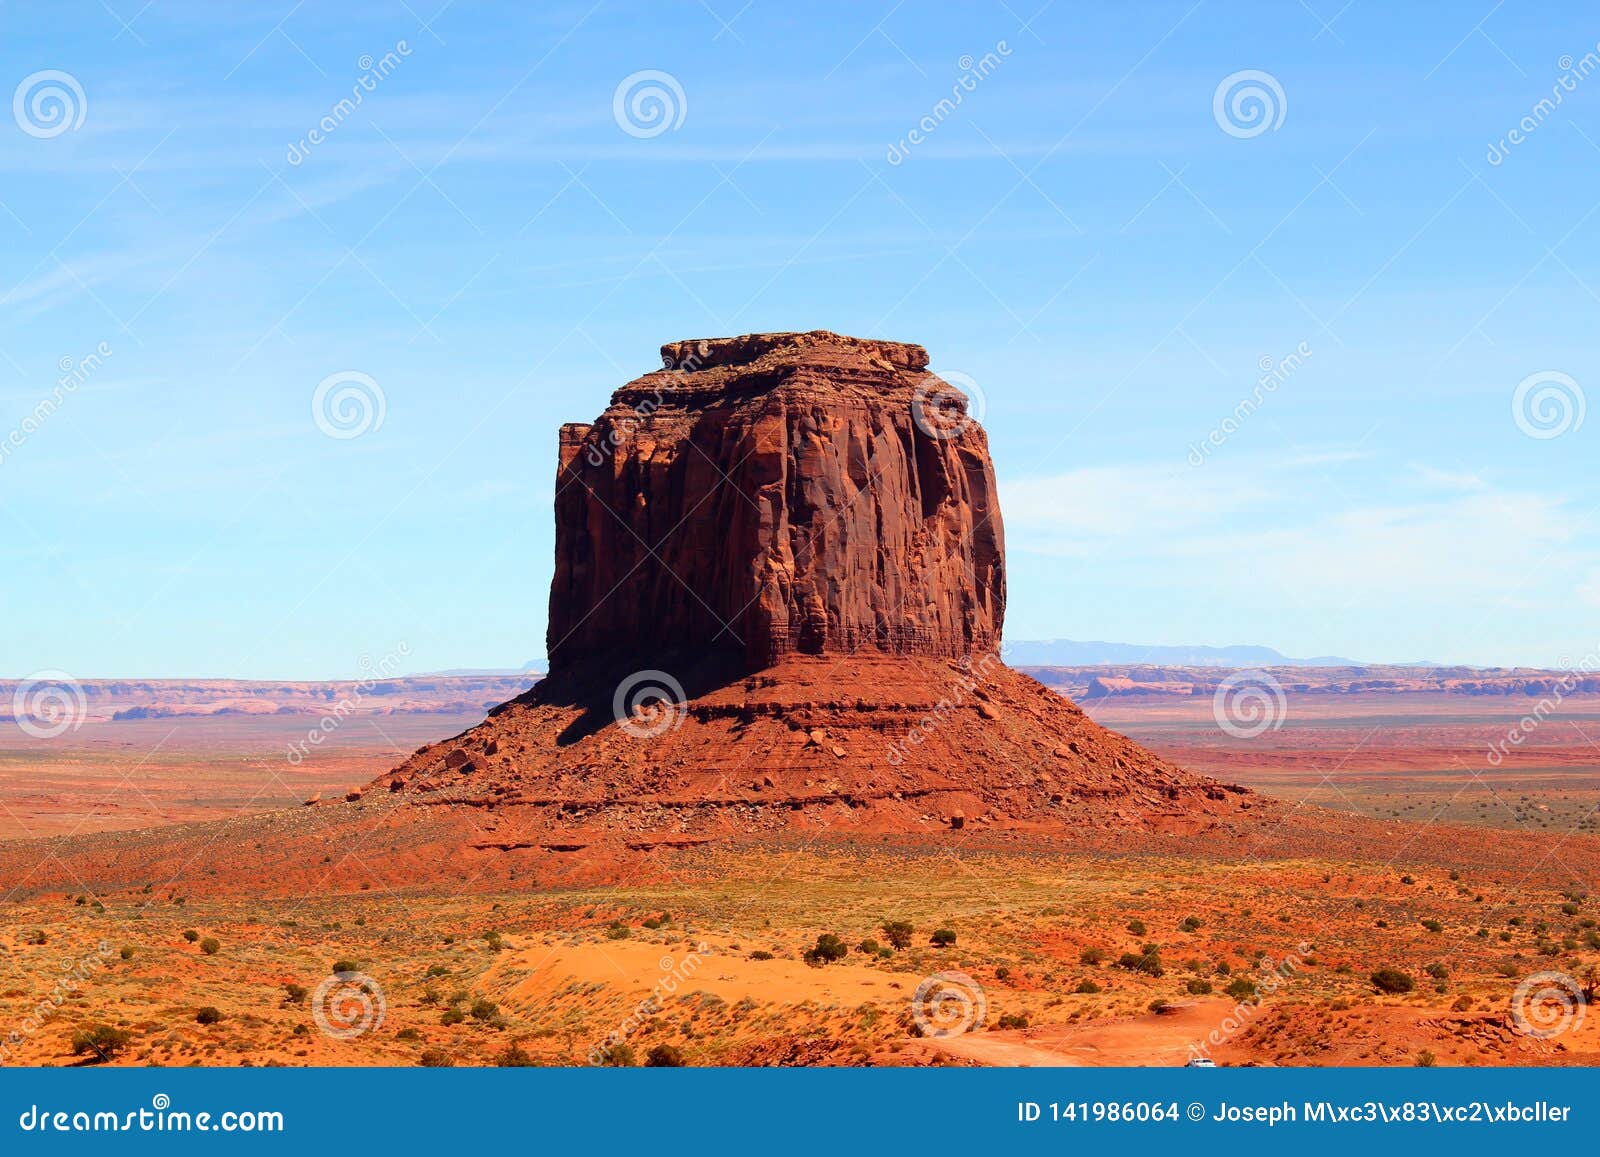 beautiful day in monument valley on the border between arizona and utah in united states - merrick butte